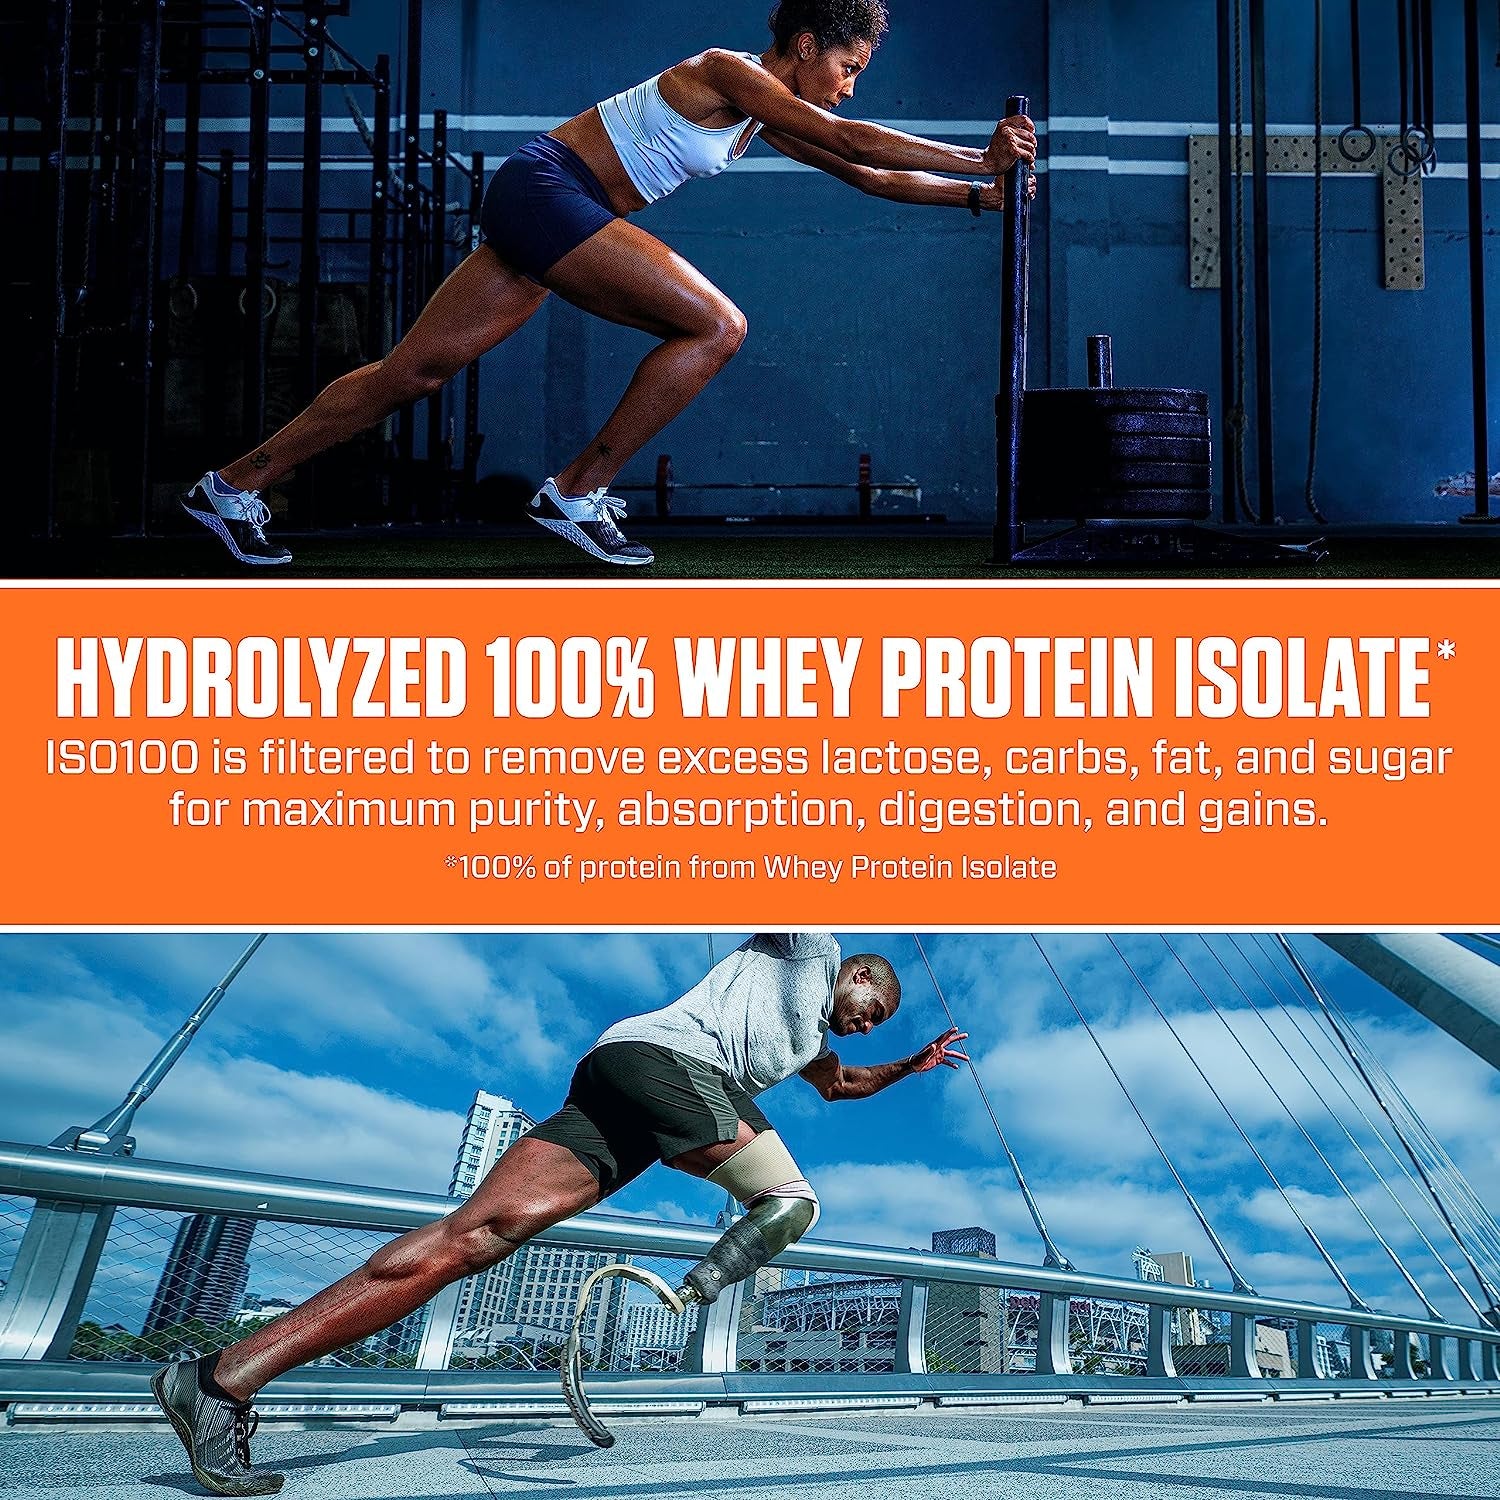 ISO100 Hydrolyzed 100% Whey Isolate Protein Powder in Dunkin' Cappuccino Flavor, 25G Protein, 95Mg Caffeine, 5.5G Bcaas, Gluten Free, Fast Absorbing, Easy Digesting, 20.8 Oz, 1.3 Pound